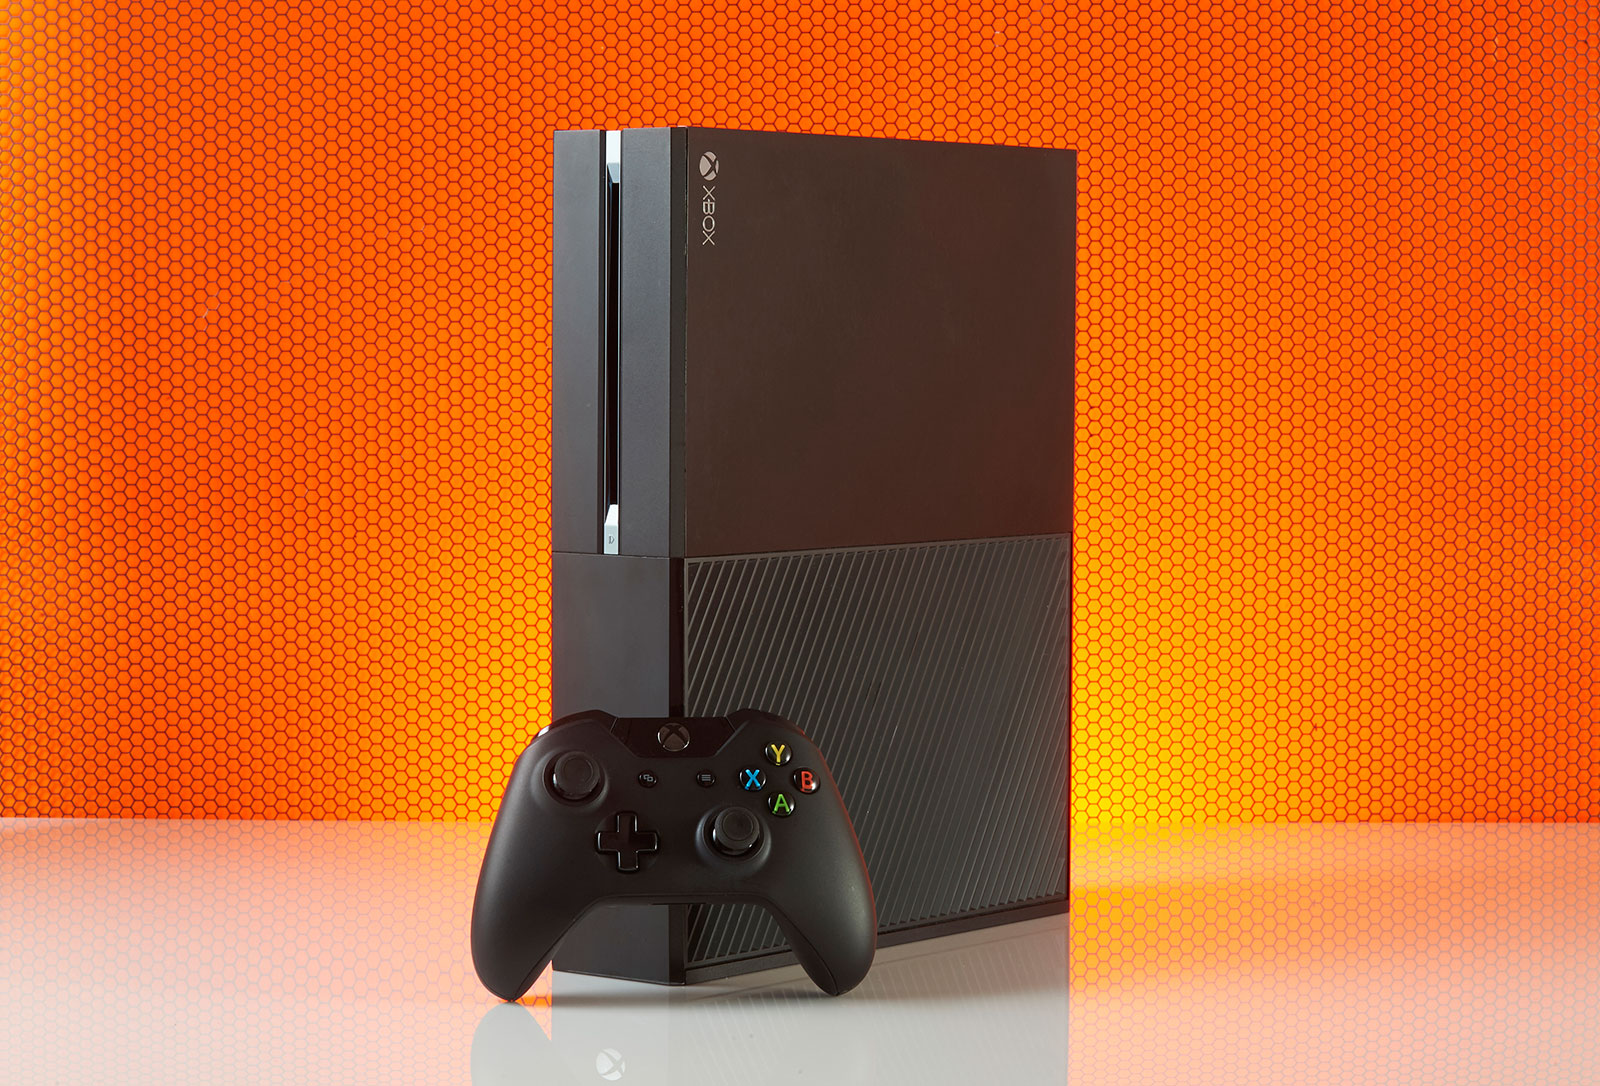 The Xbox One revisited: Microsoft's console has gotten better with age